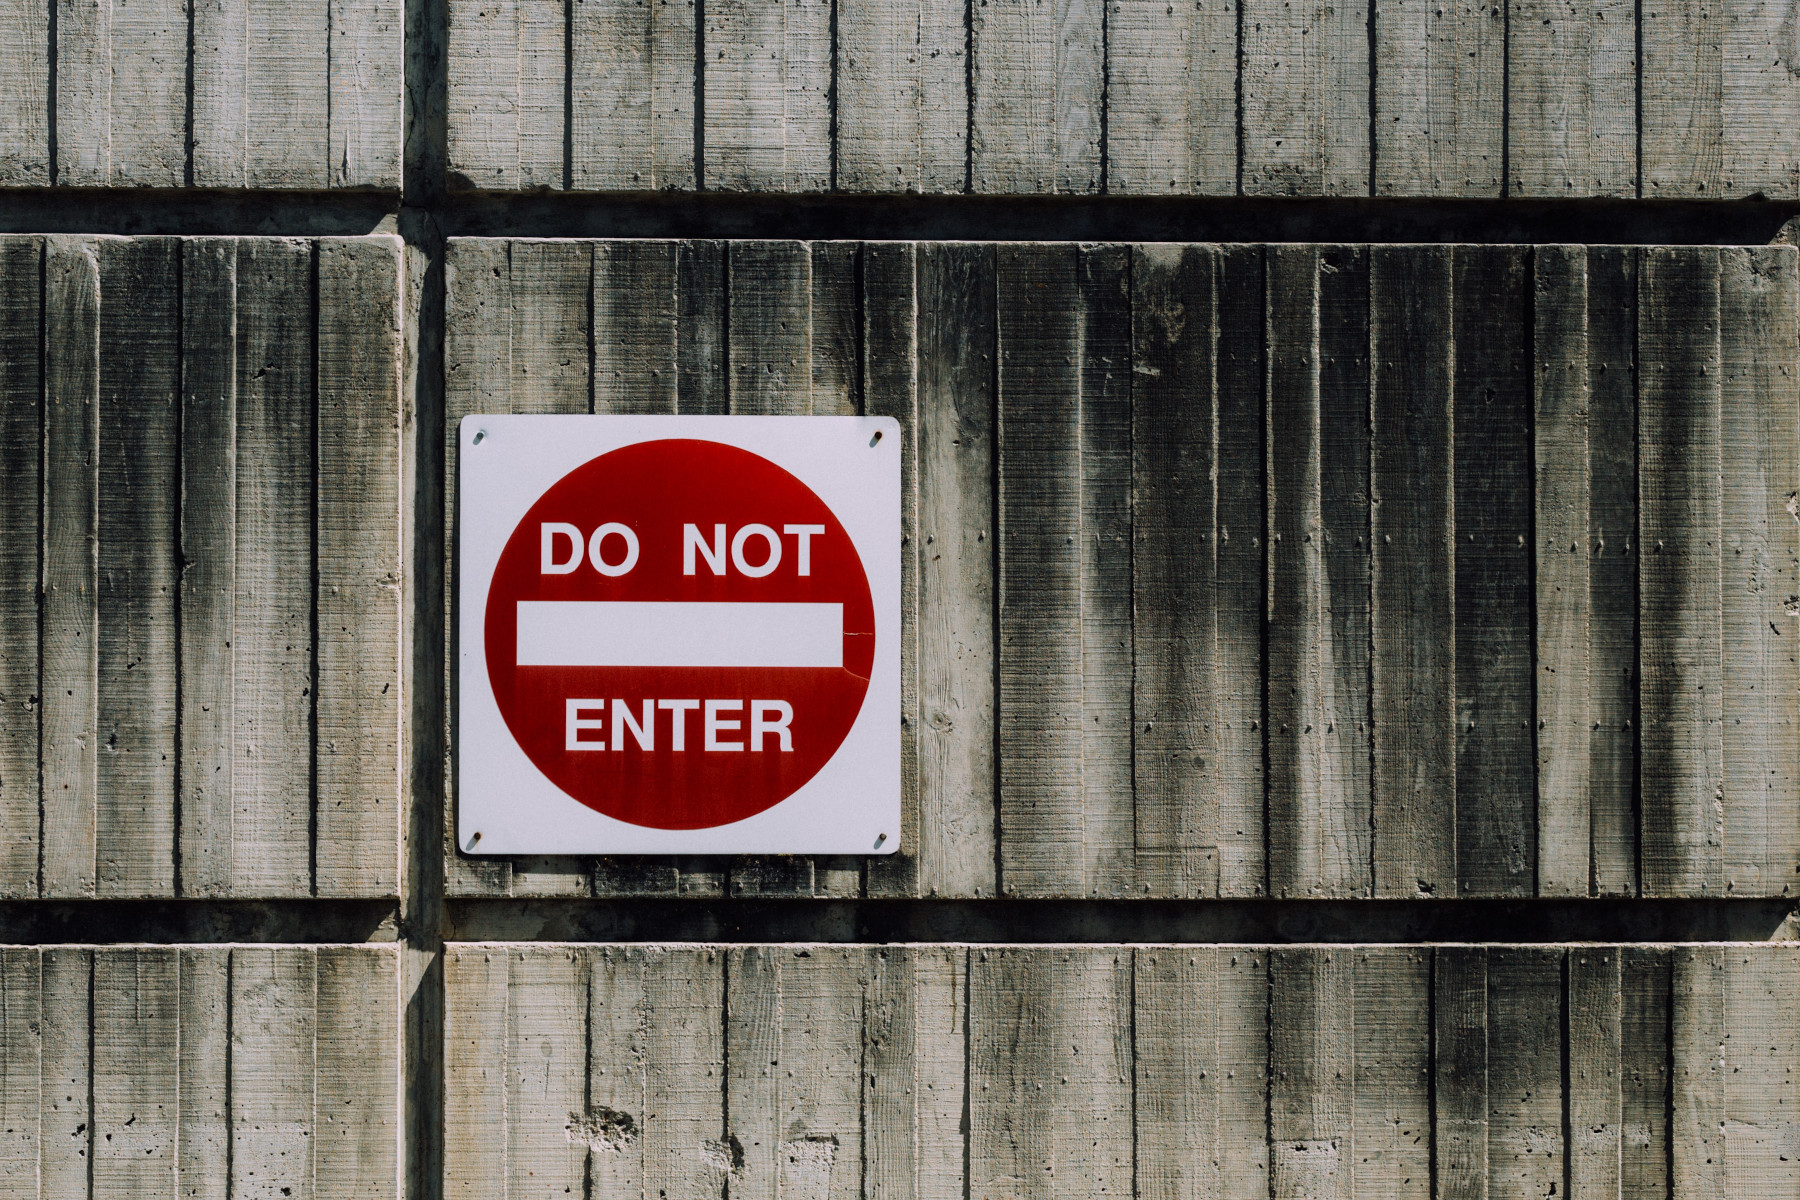 Wooden fence showing a large Do Not Enter sign with a red circle on a square white sign